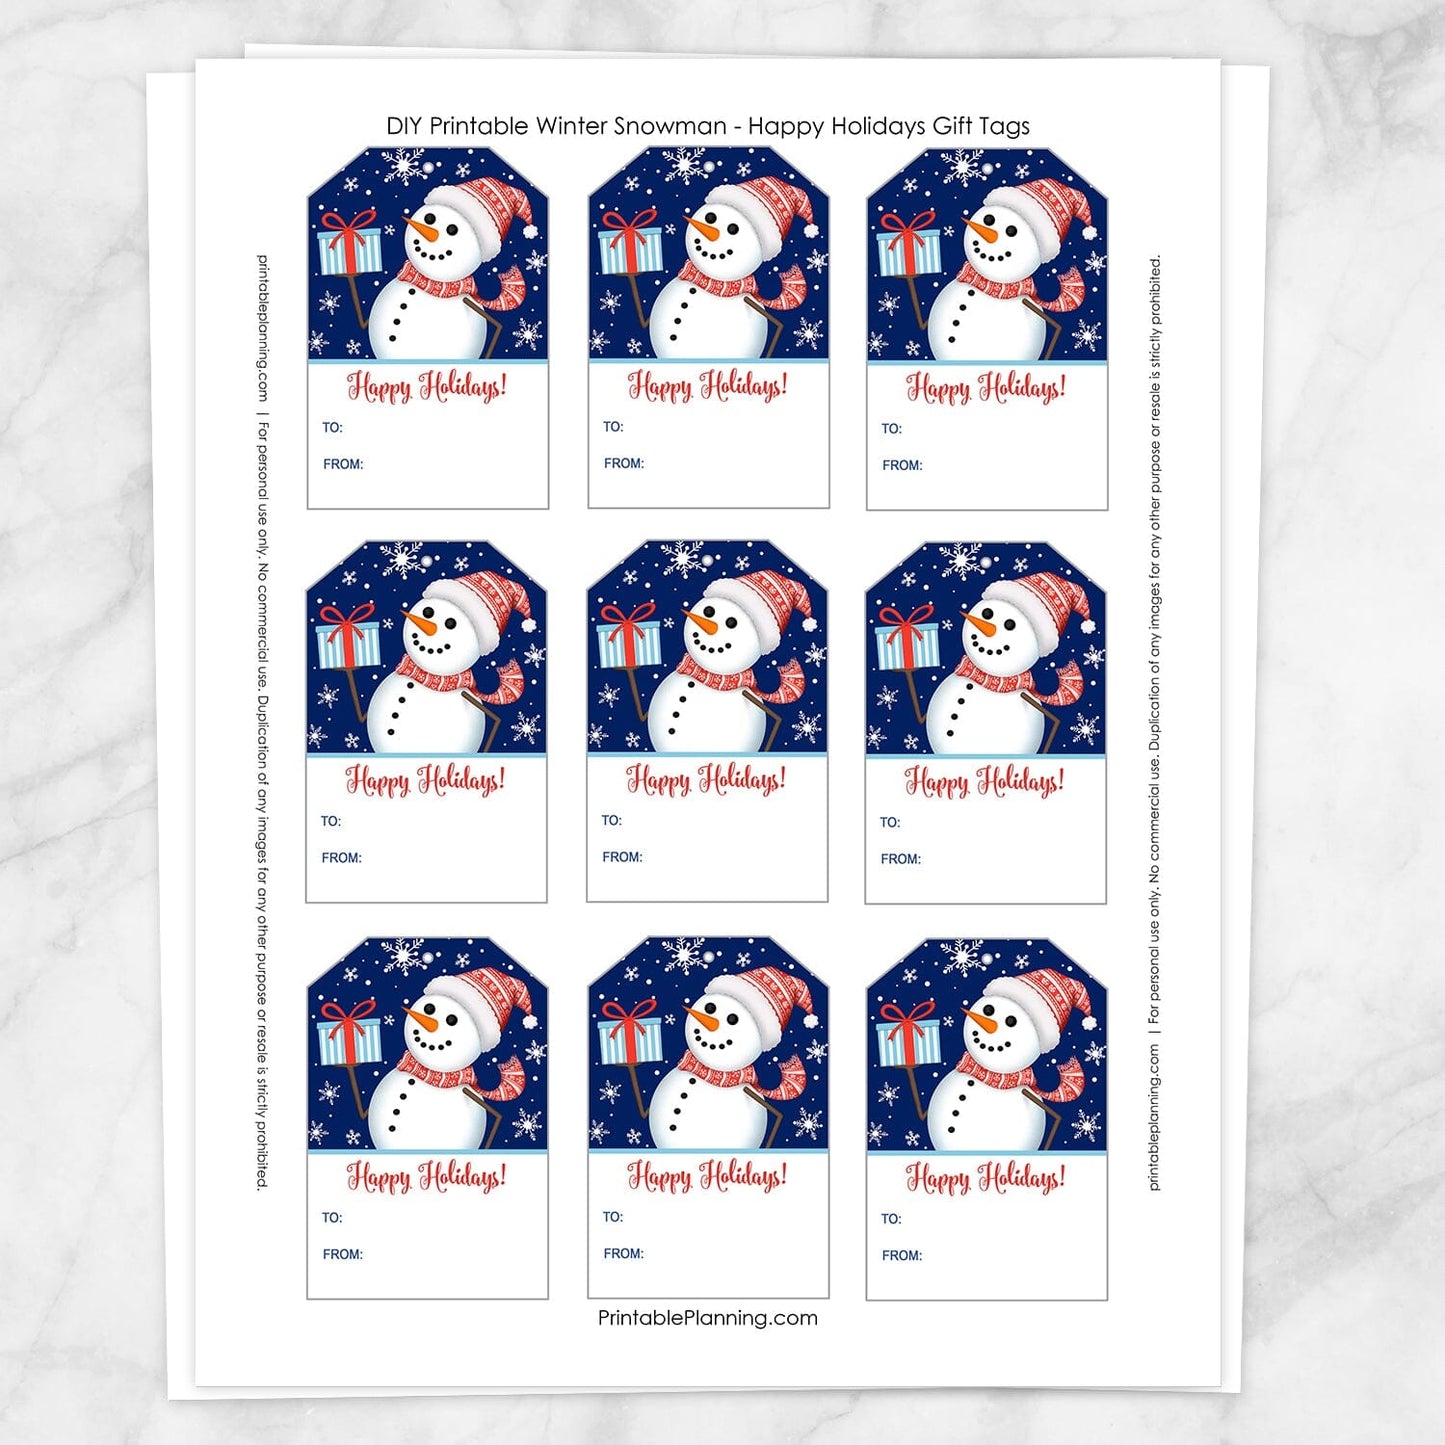 Printable Winter Snowman Happy Holidays Gift Tags from Printable Planning. Image shows full page when printed.